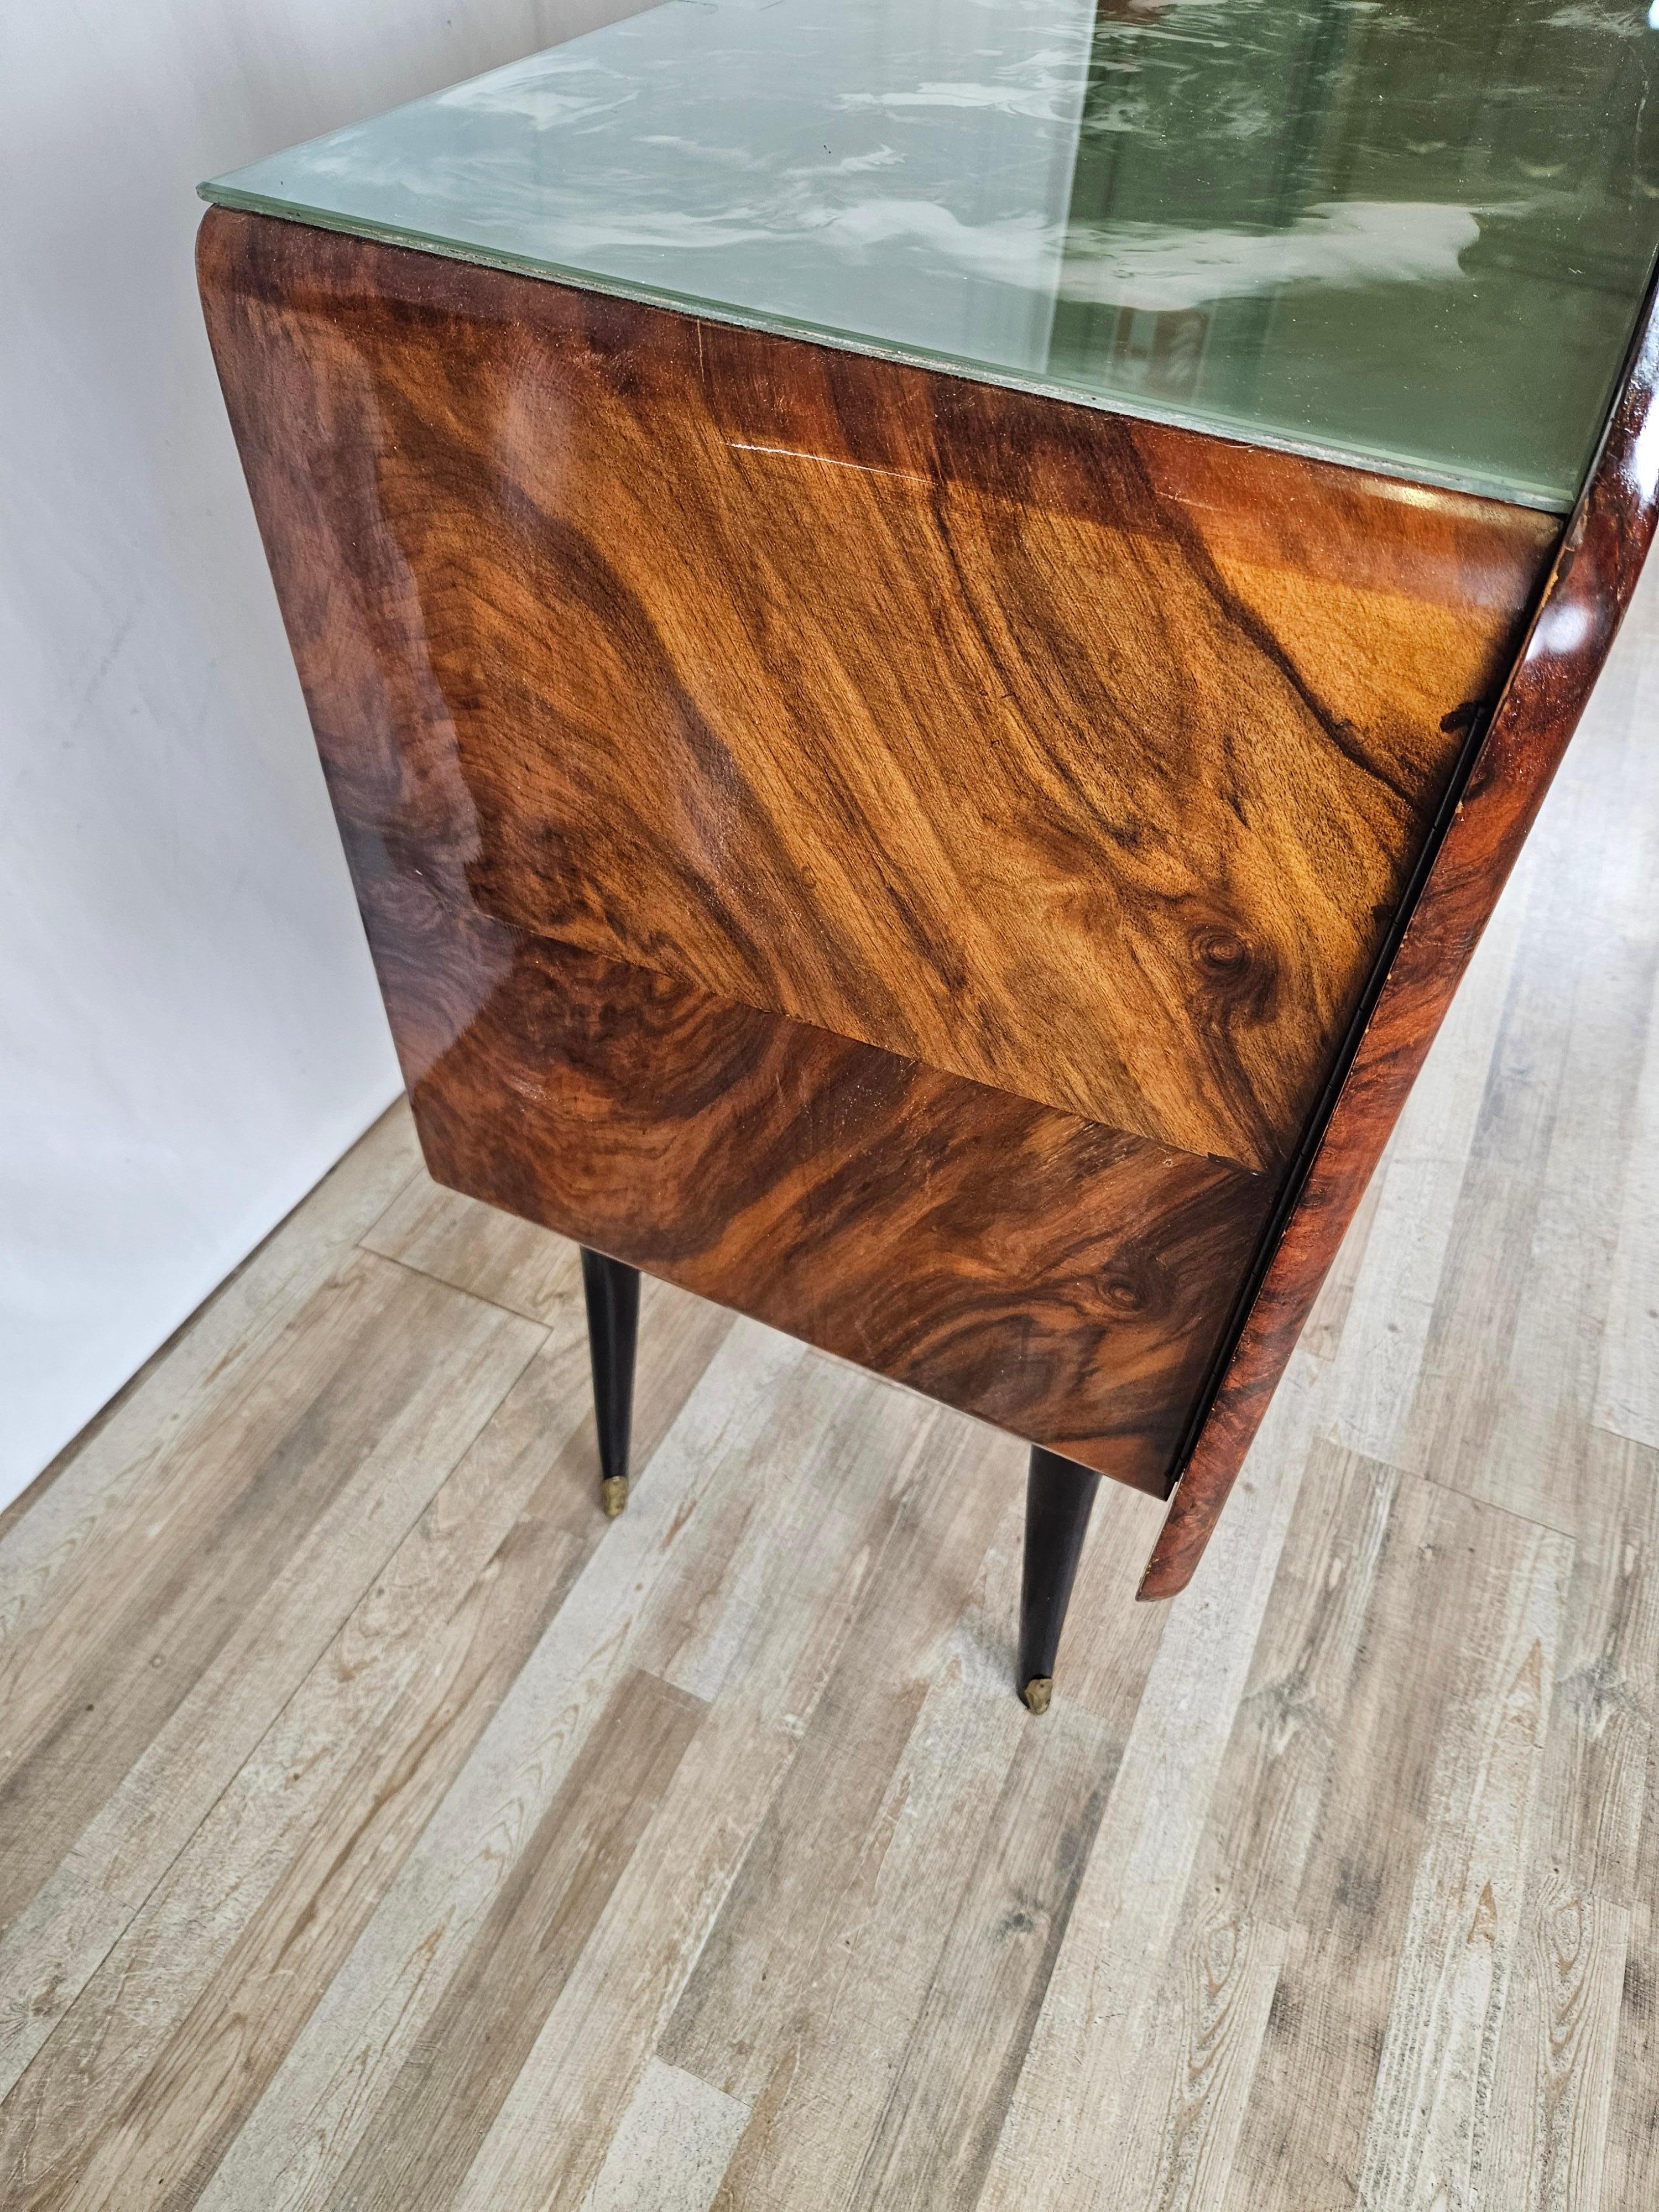 Italian-made mid-century sideboard, fully wood-paneled with three doors and green marbled glass top.

The cabinet is presented with brass handles and foot braces, and in the center is a door covered with processed glass and satin-finished on the